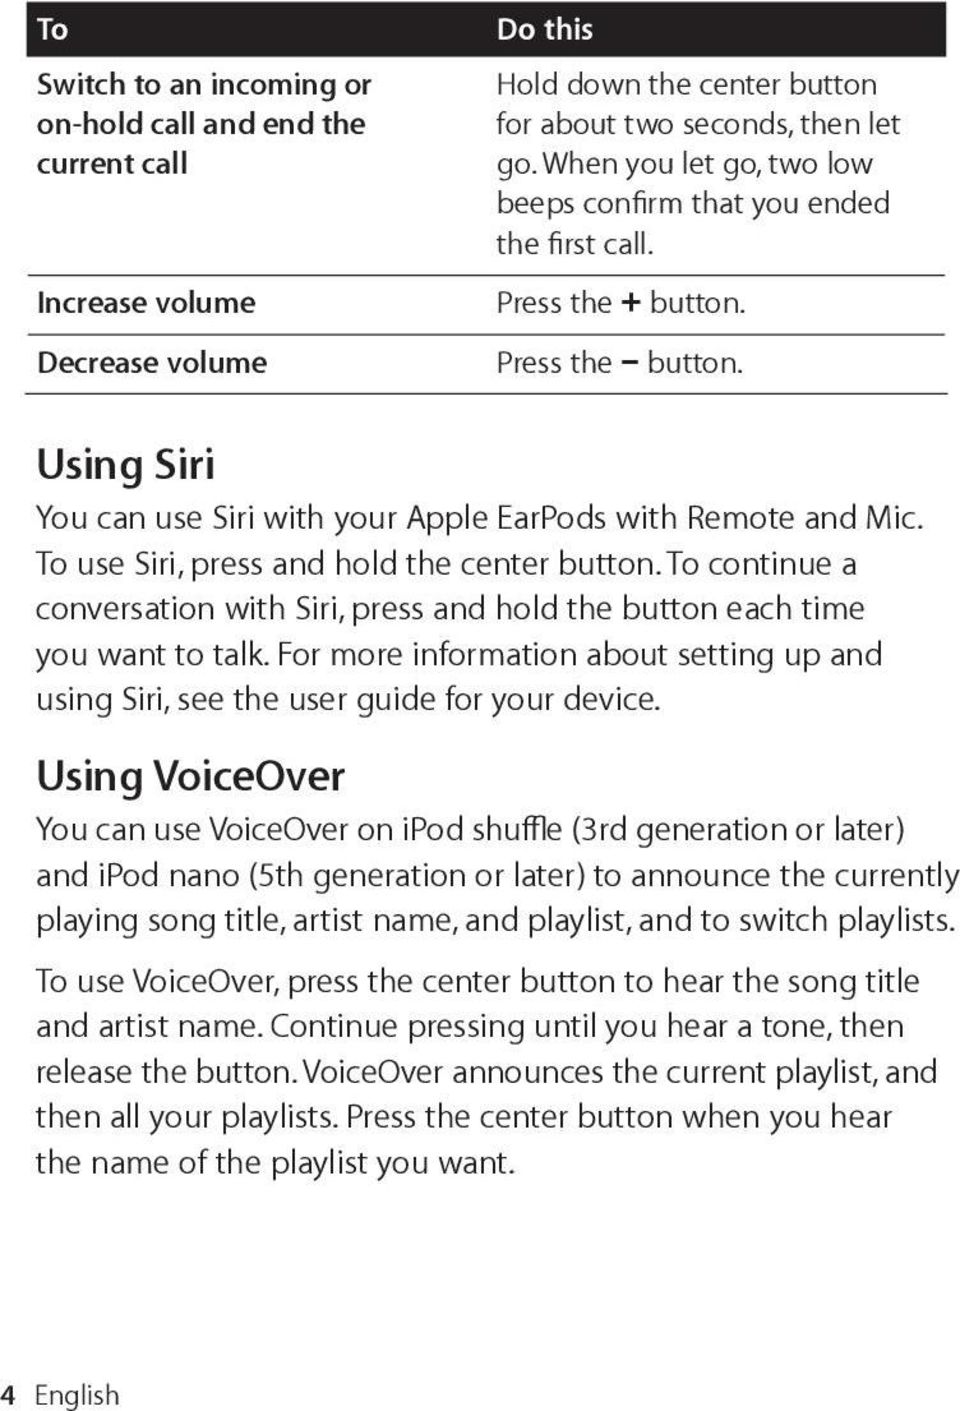 To use Siri, press and hold the center button. To continue a conversation with Siri, press and hold the button each time you want to talk.